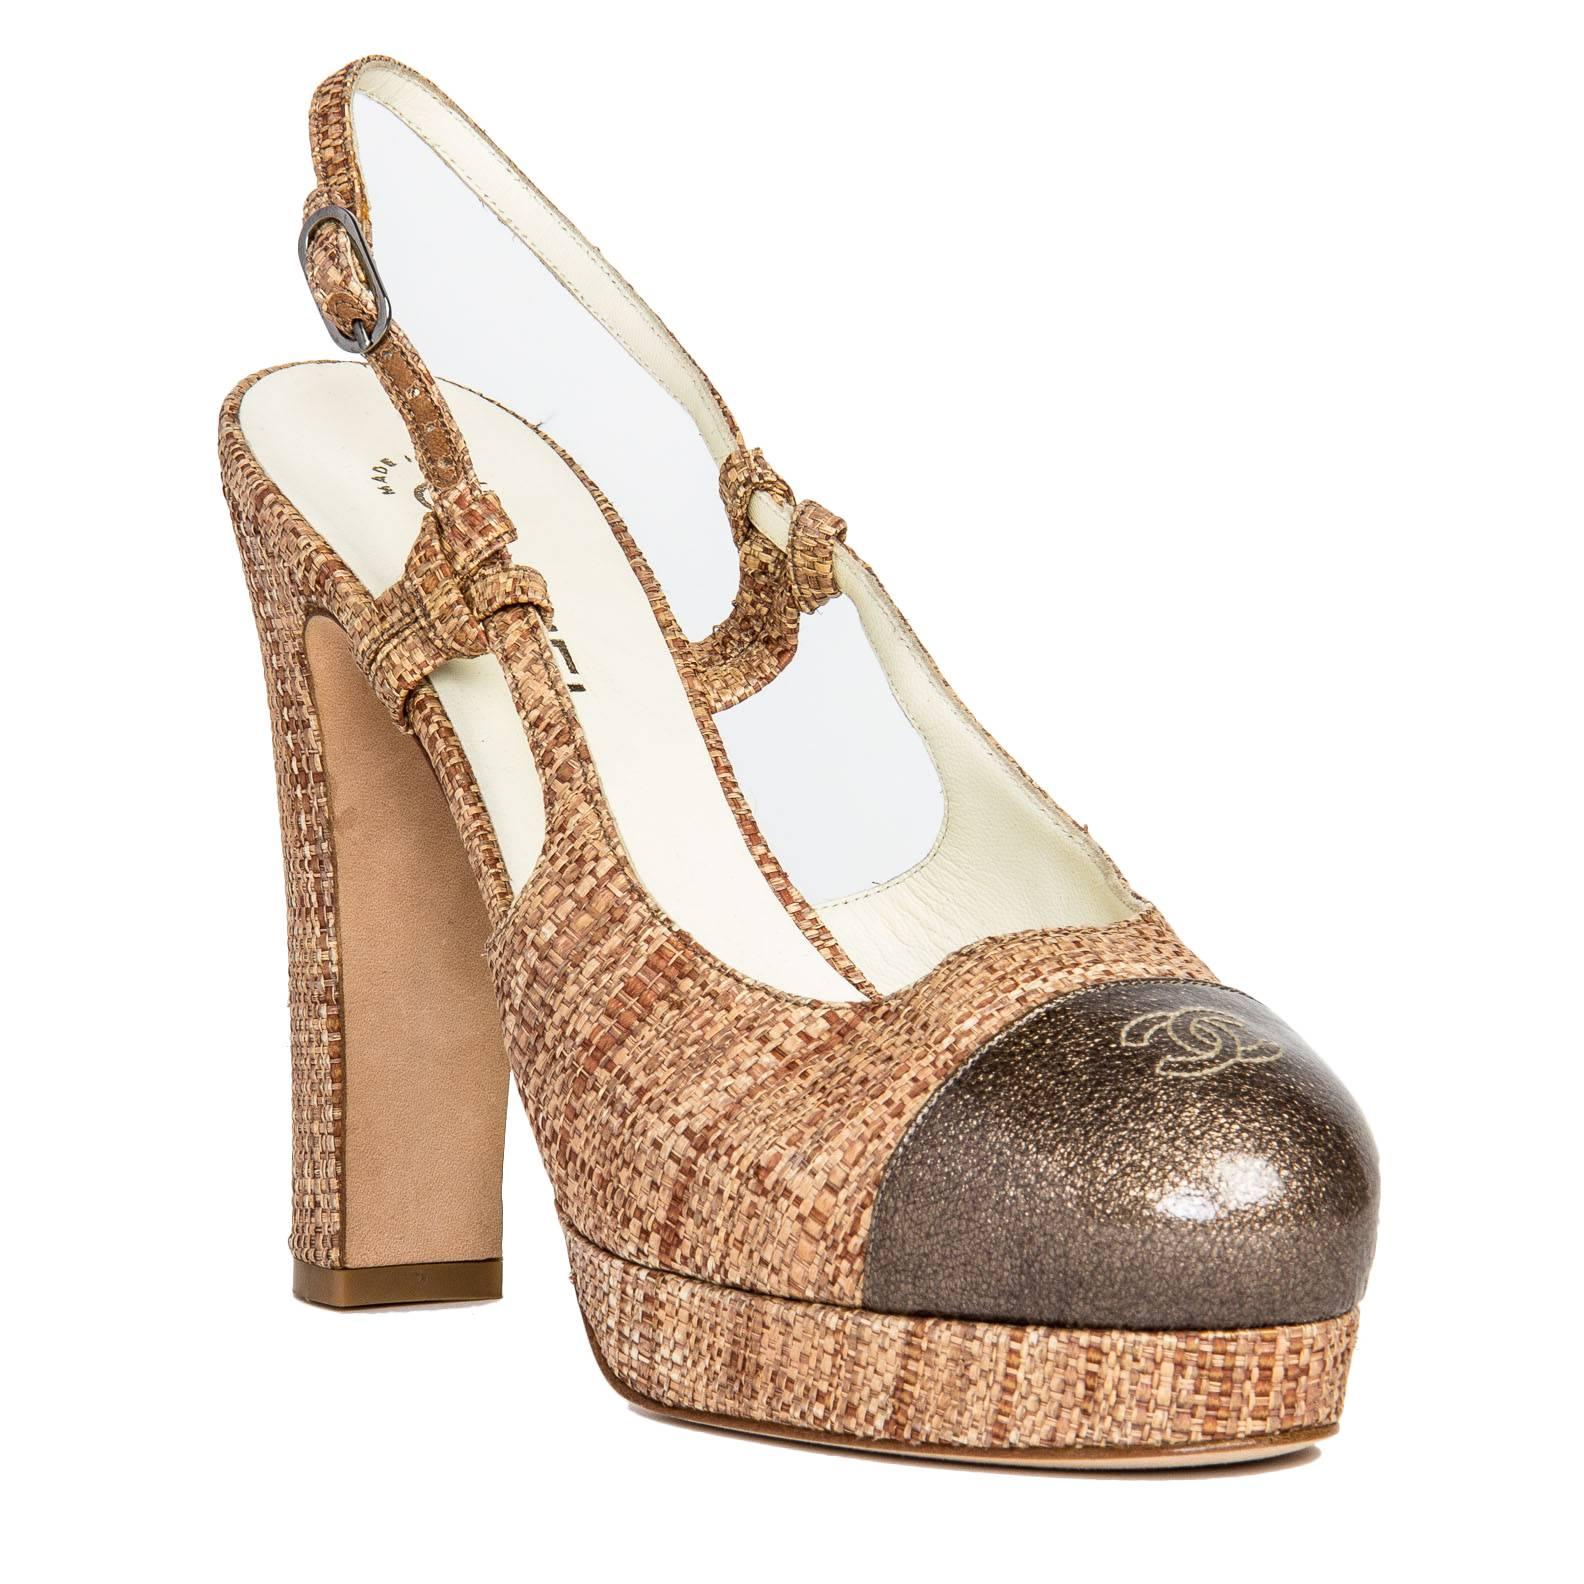 Splendid rattan and leather sling back platform sandals with bronze round cap toe detail enriched by a Chanel logo. Made in Italy. Heel 5.25".

Size  41 Italian sizing

Condition  Excellent: never worn